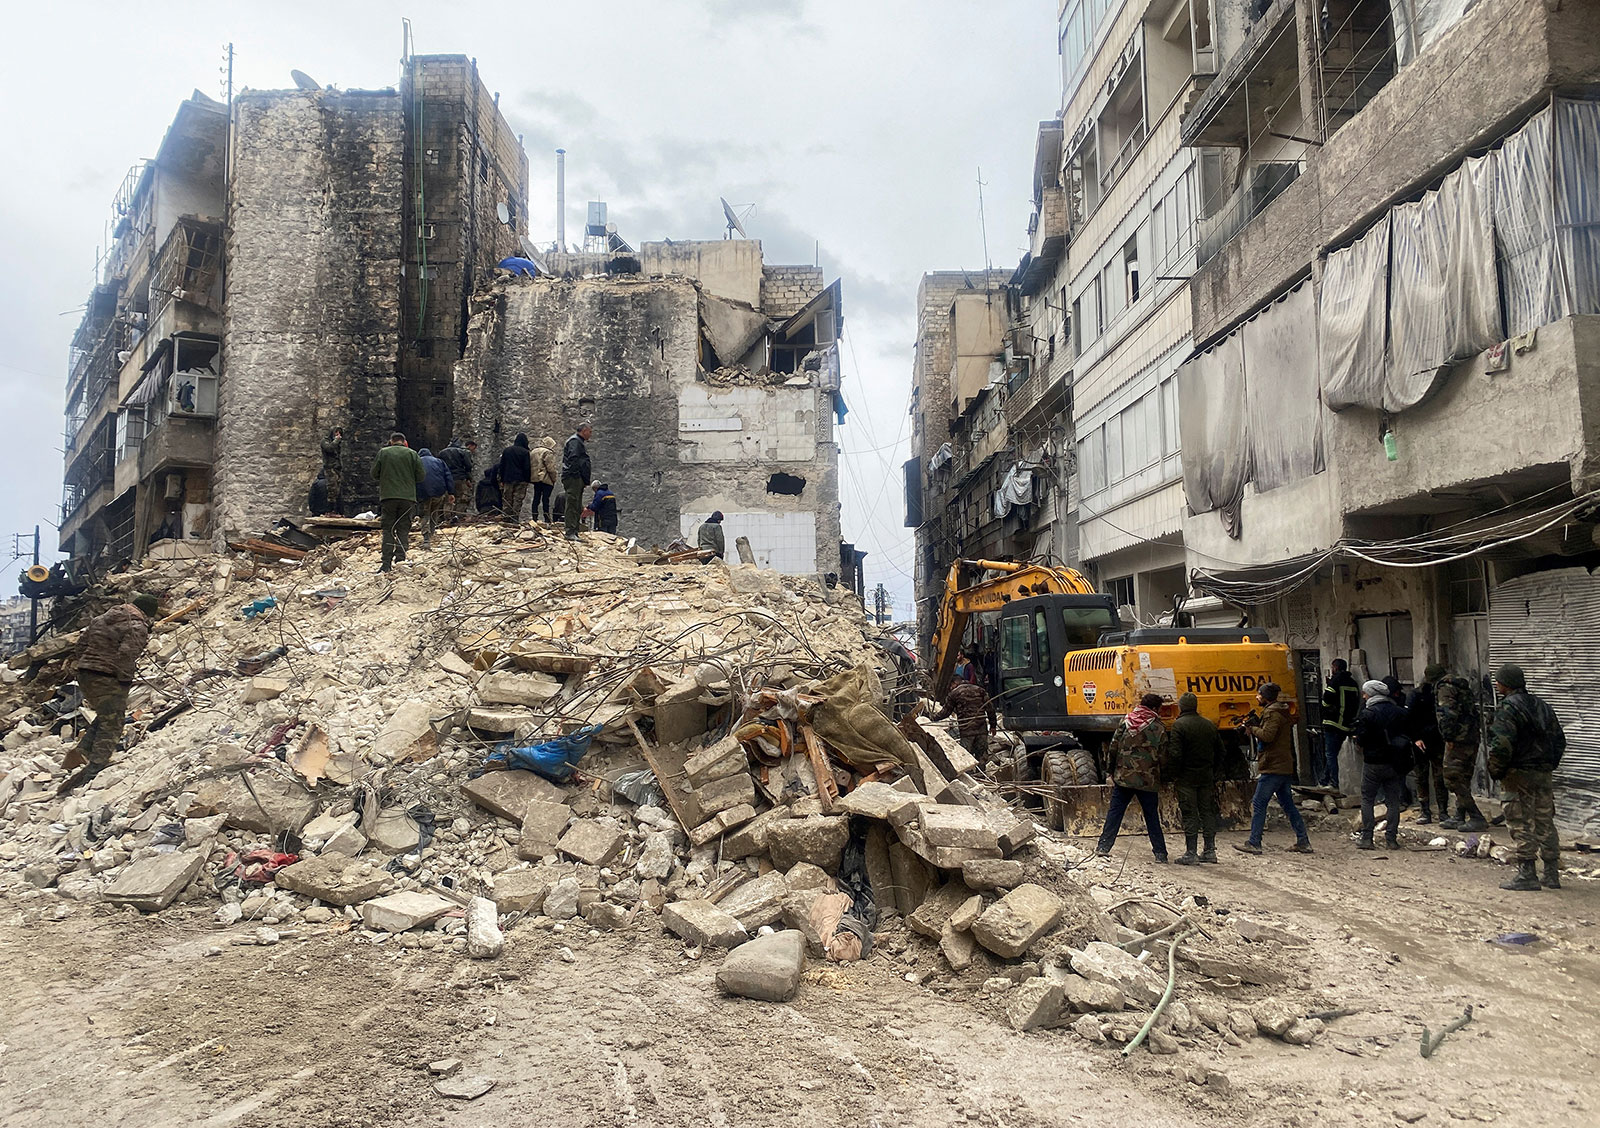 People search for survivors under the rubble in Aleppo, Syria, on February 6.